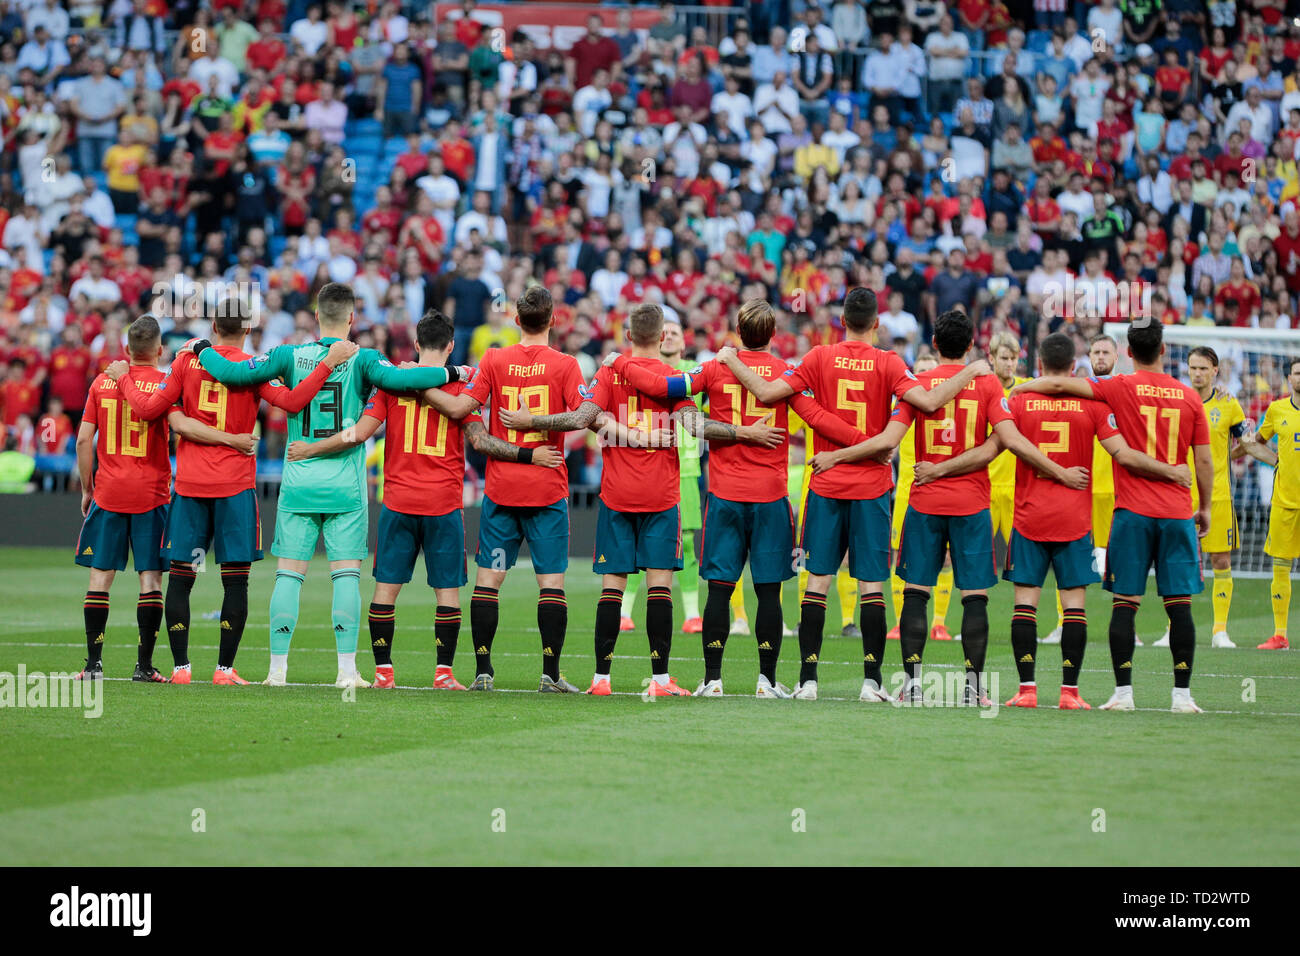 Spain national team seen during the UEFA EURO 2020 Qualifier match between Spain and Sweden at Santiago Bernabeu Stadium in Madrid. Final score: Spain 3 - Sweden 0 Stock Photo